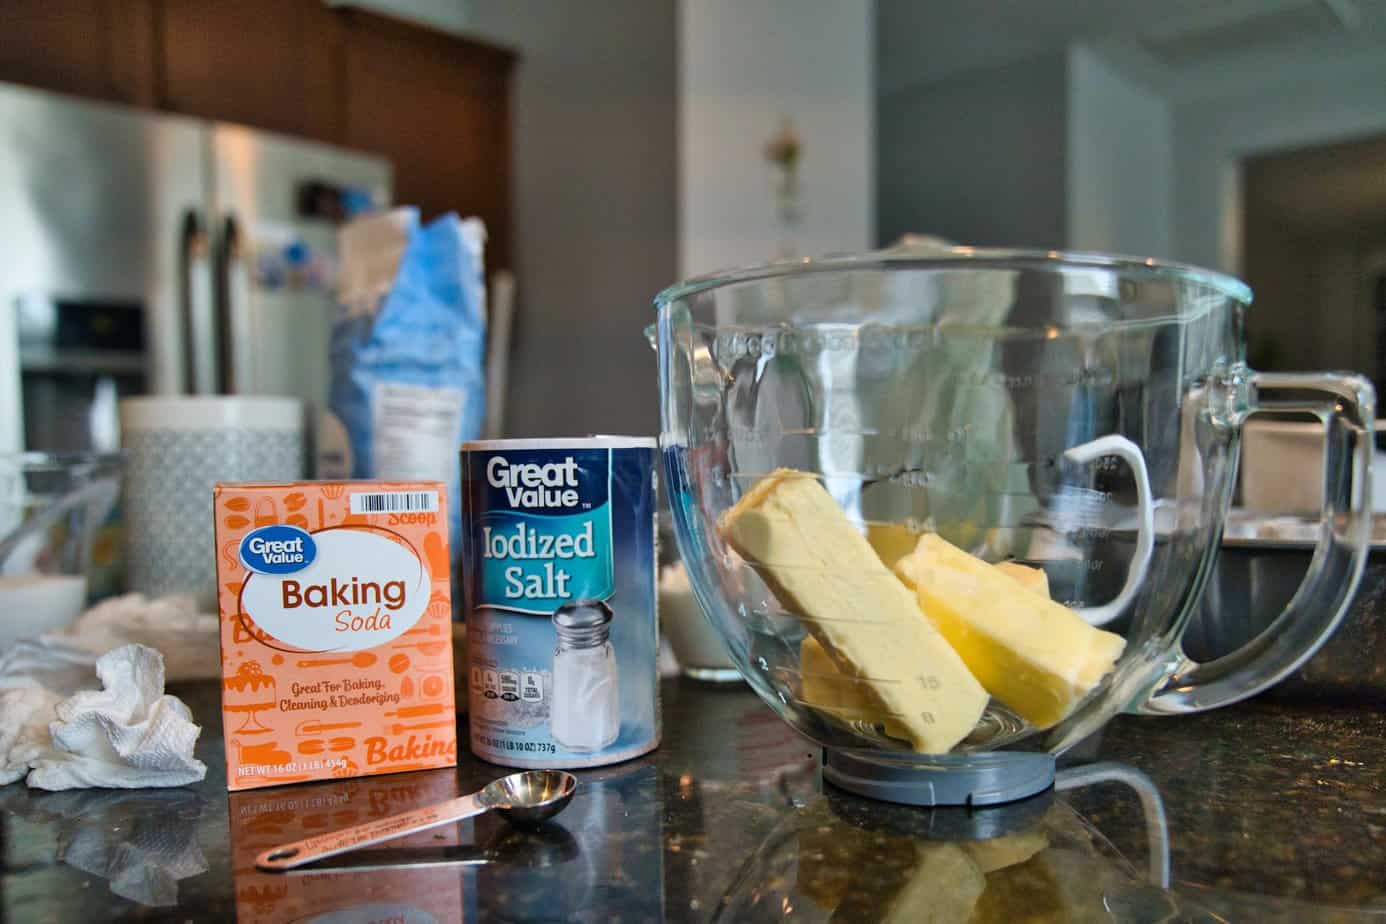 6 uses of baking soda in home cleaning